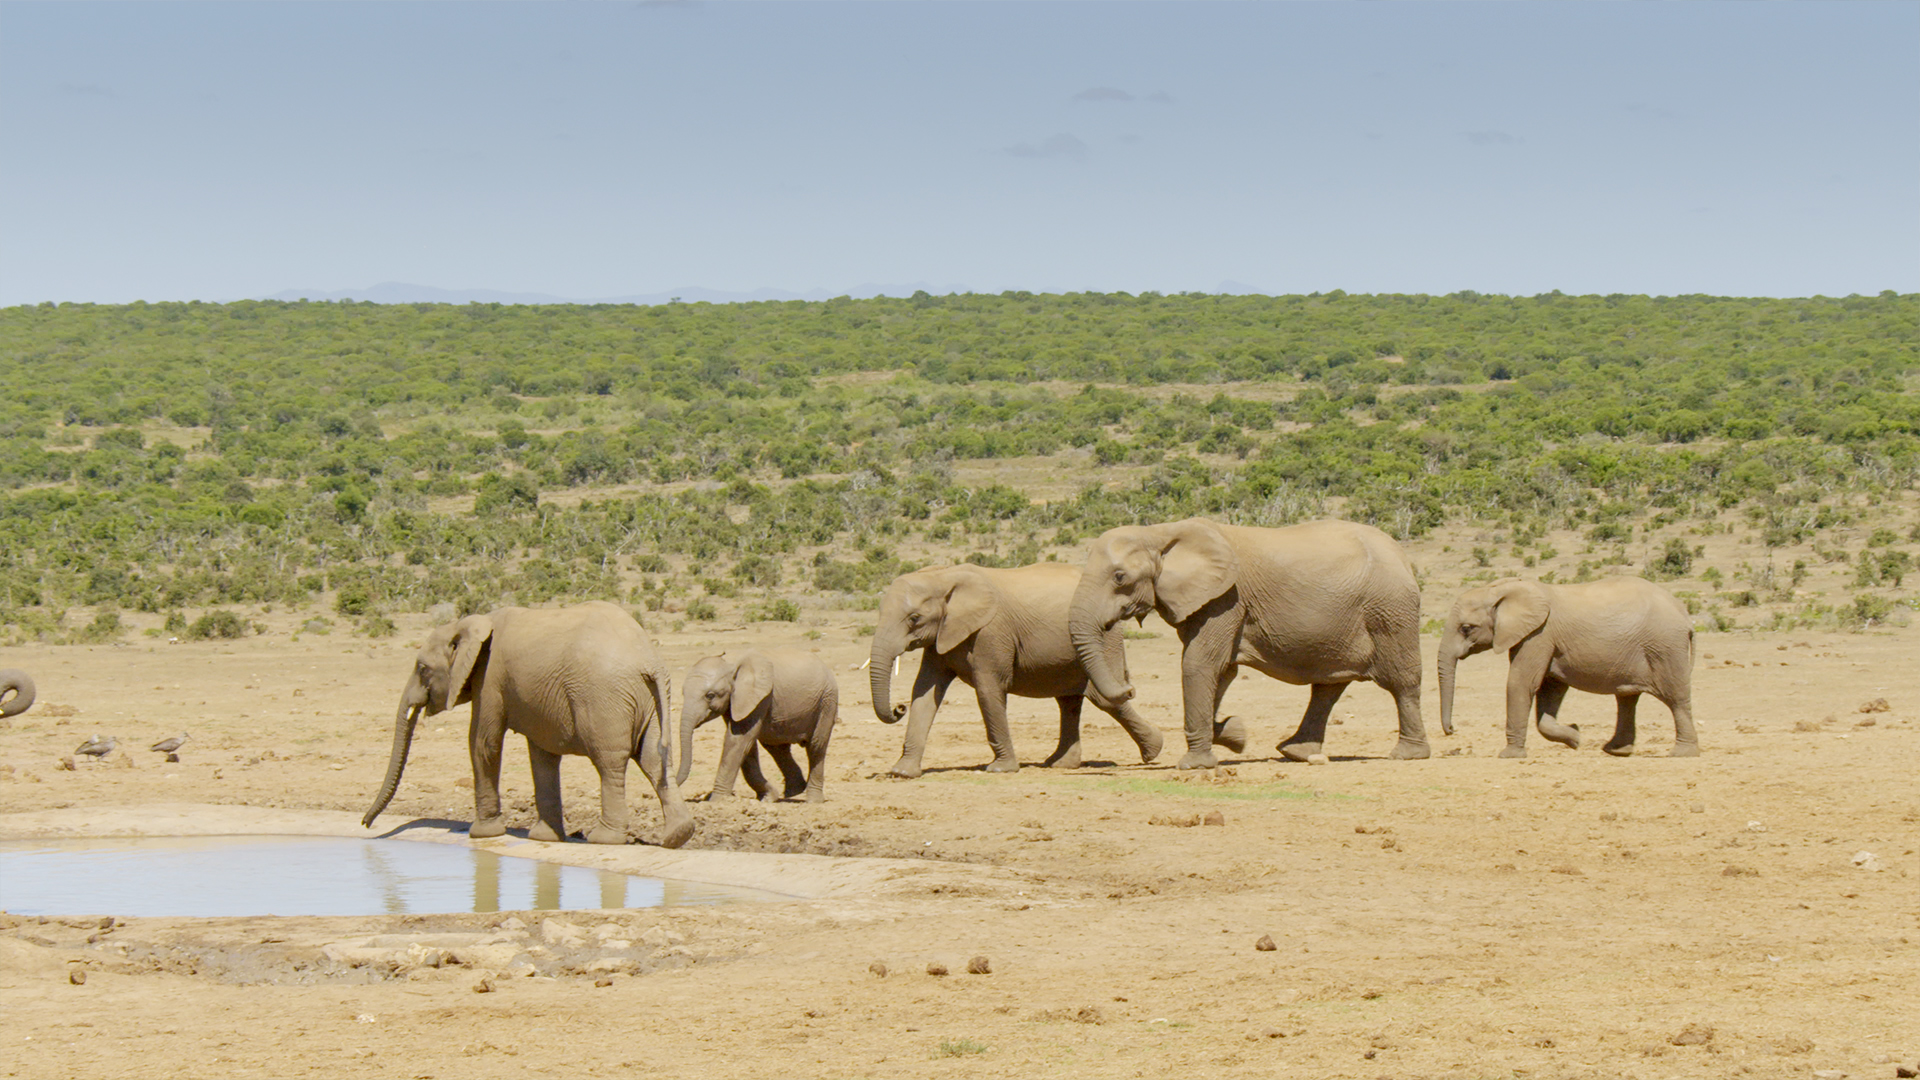 Great Parks of Africa - E1 - Addo Elephant National Park